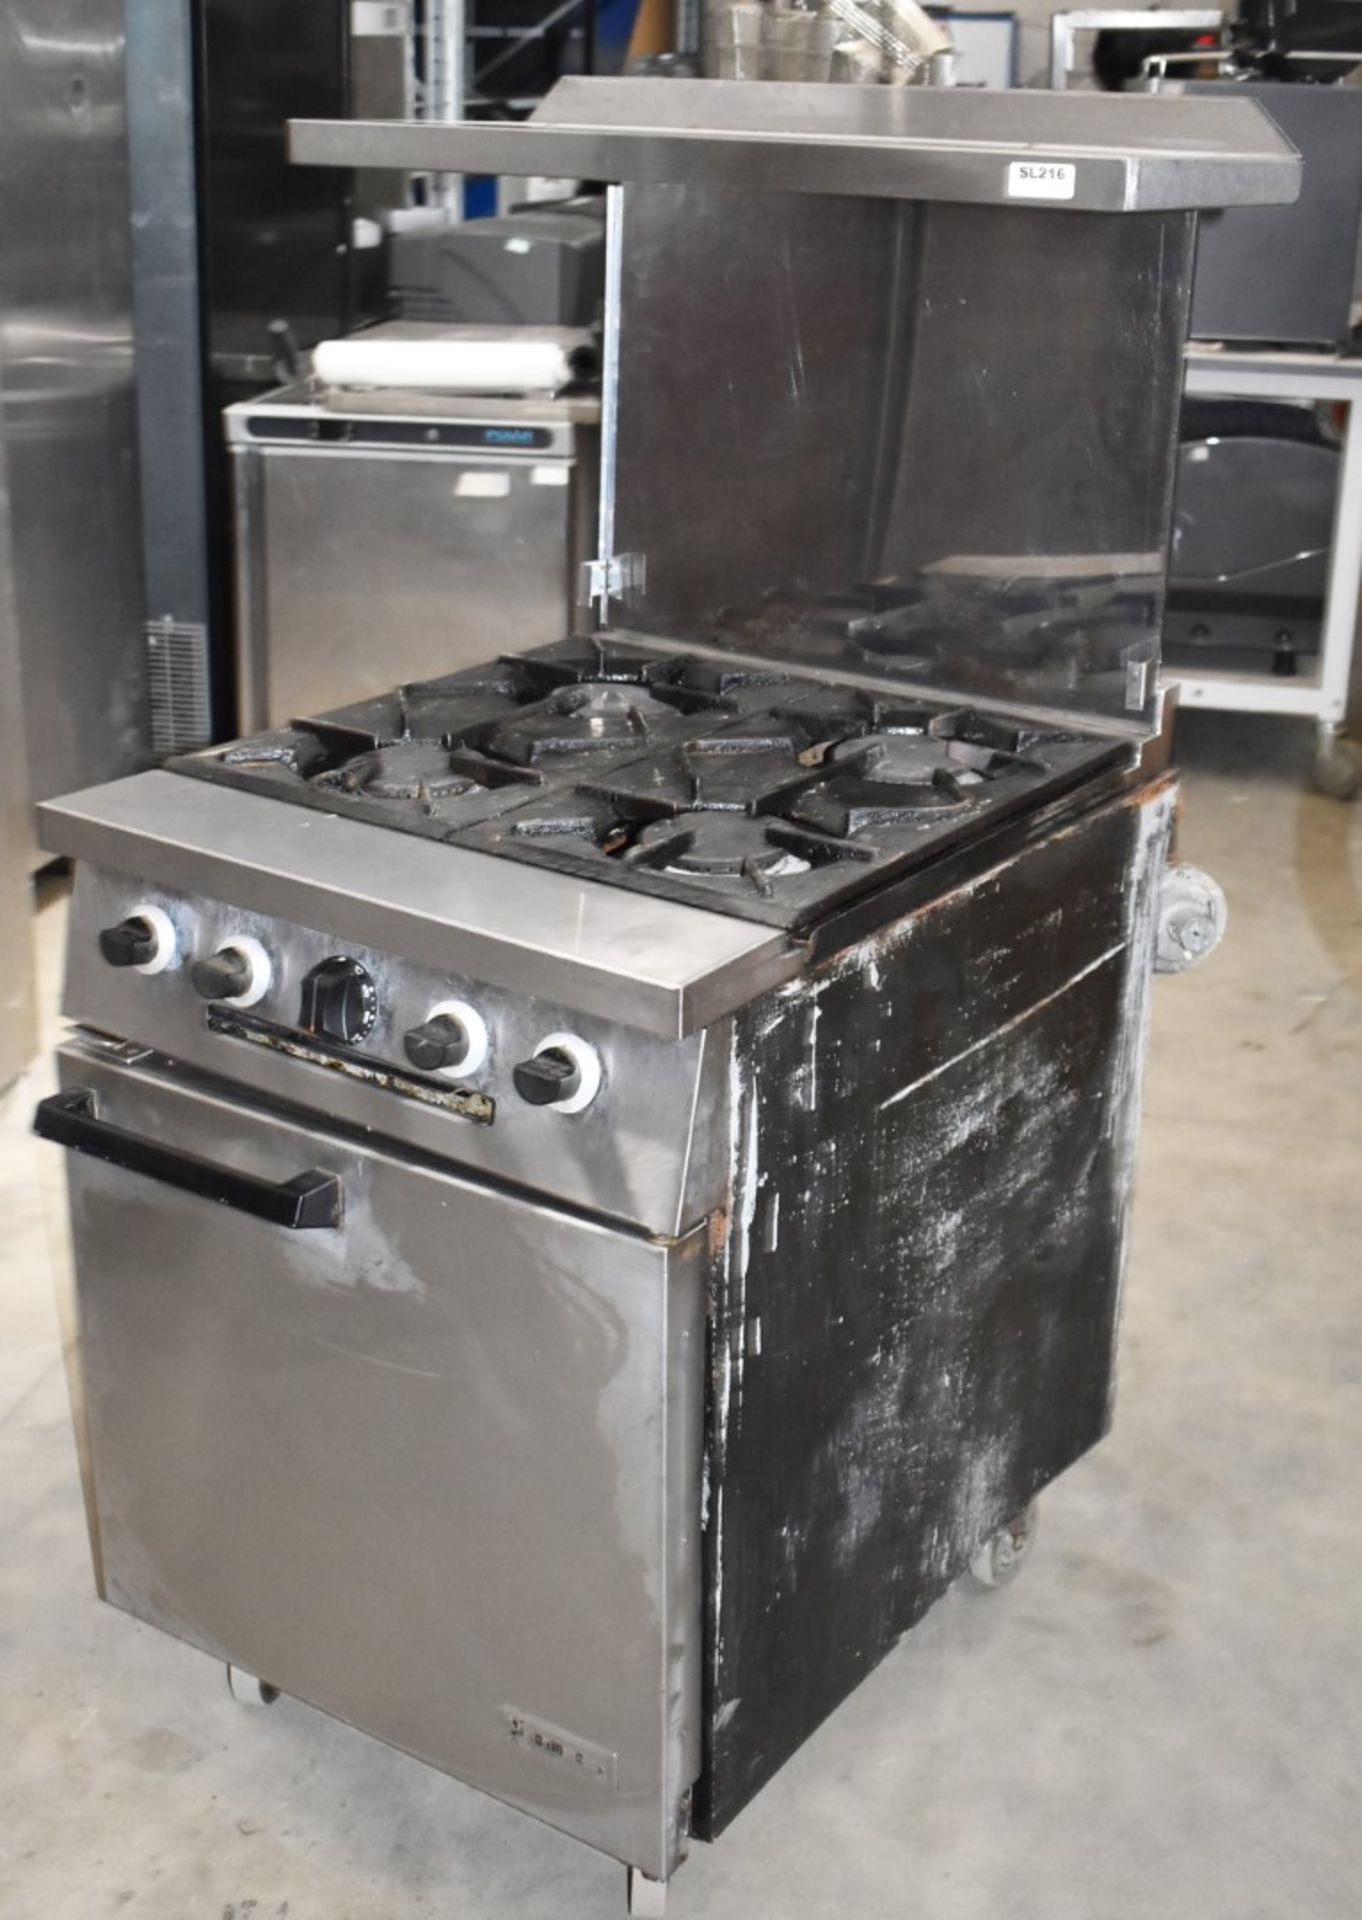 1 x Falcon Dominator Four Burner Gas Range Cooker - Dimensions: H89 x W60 x D85 cms - Recently - Image 3 of 11